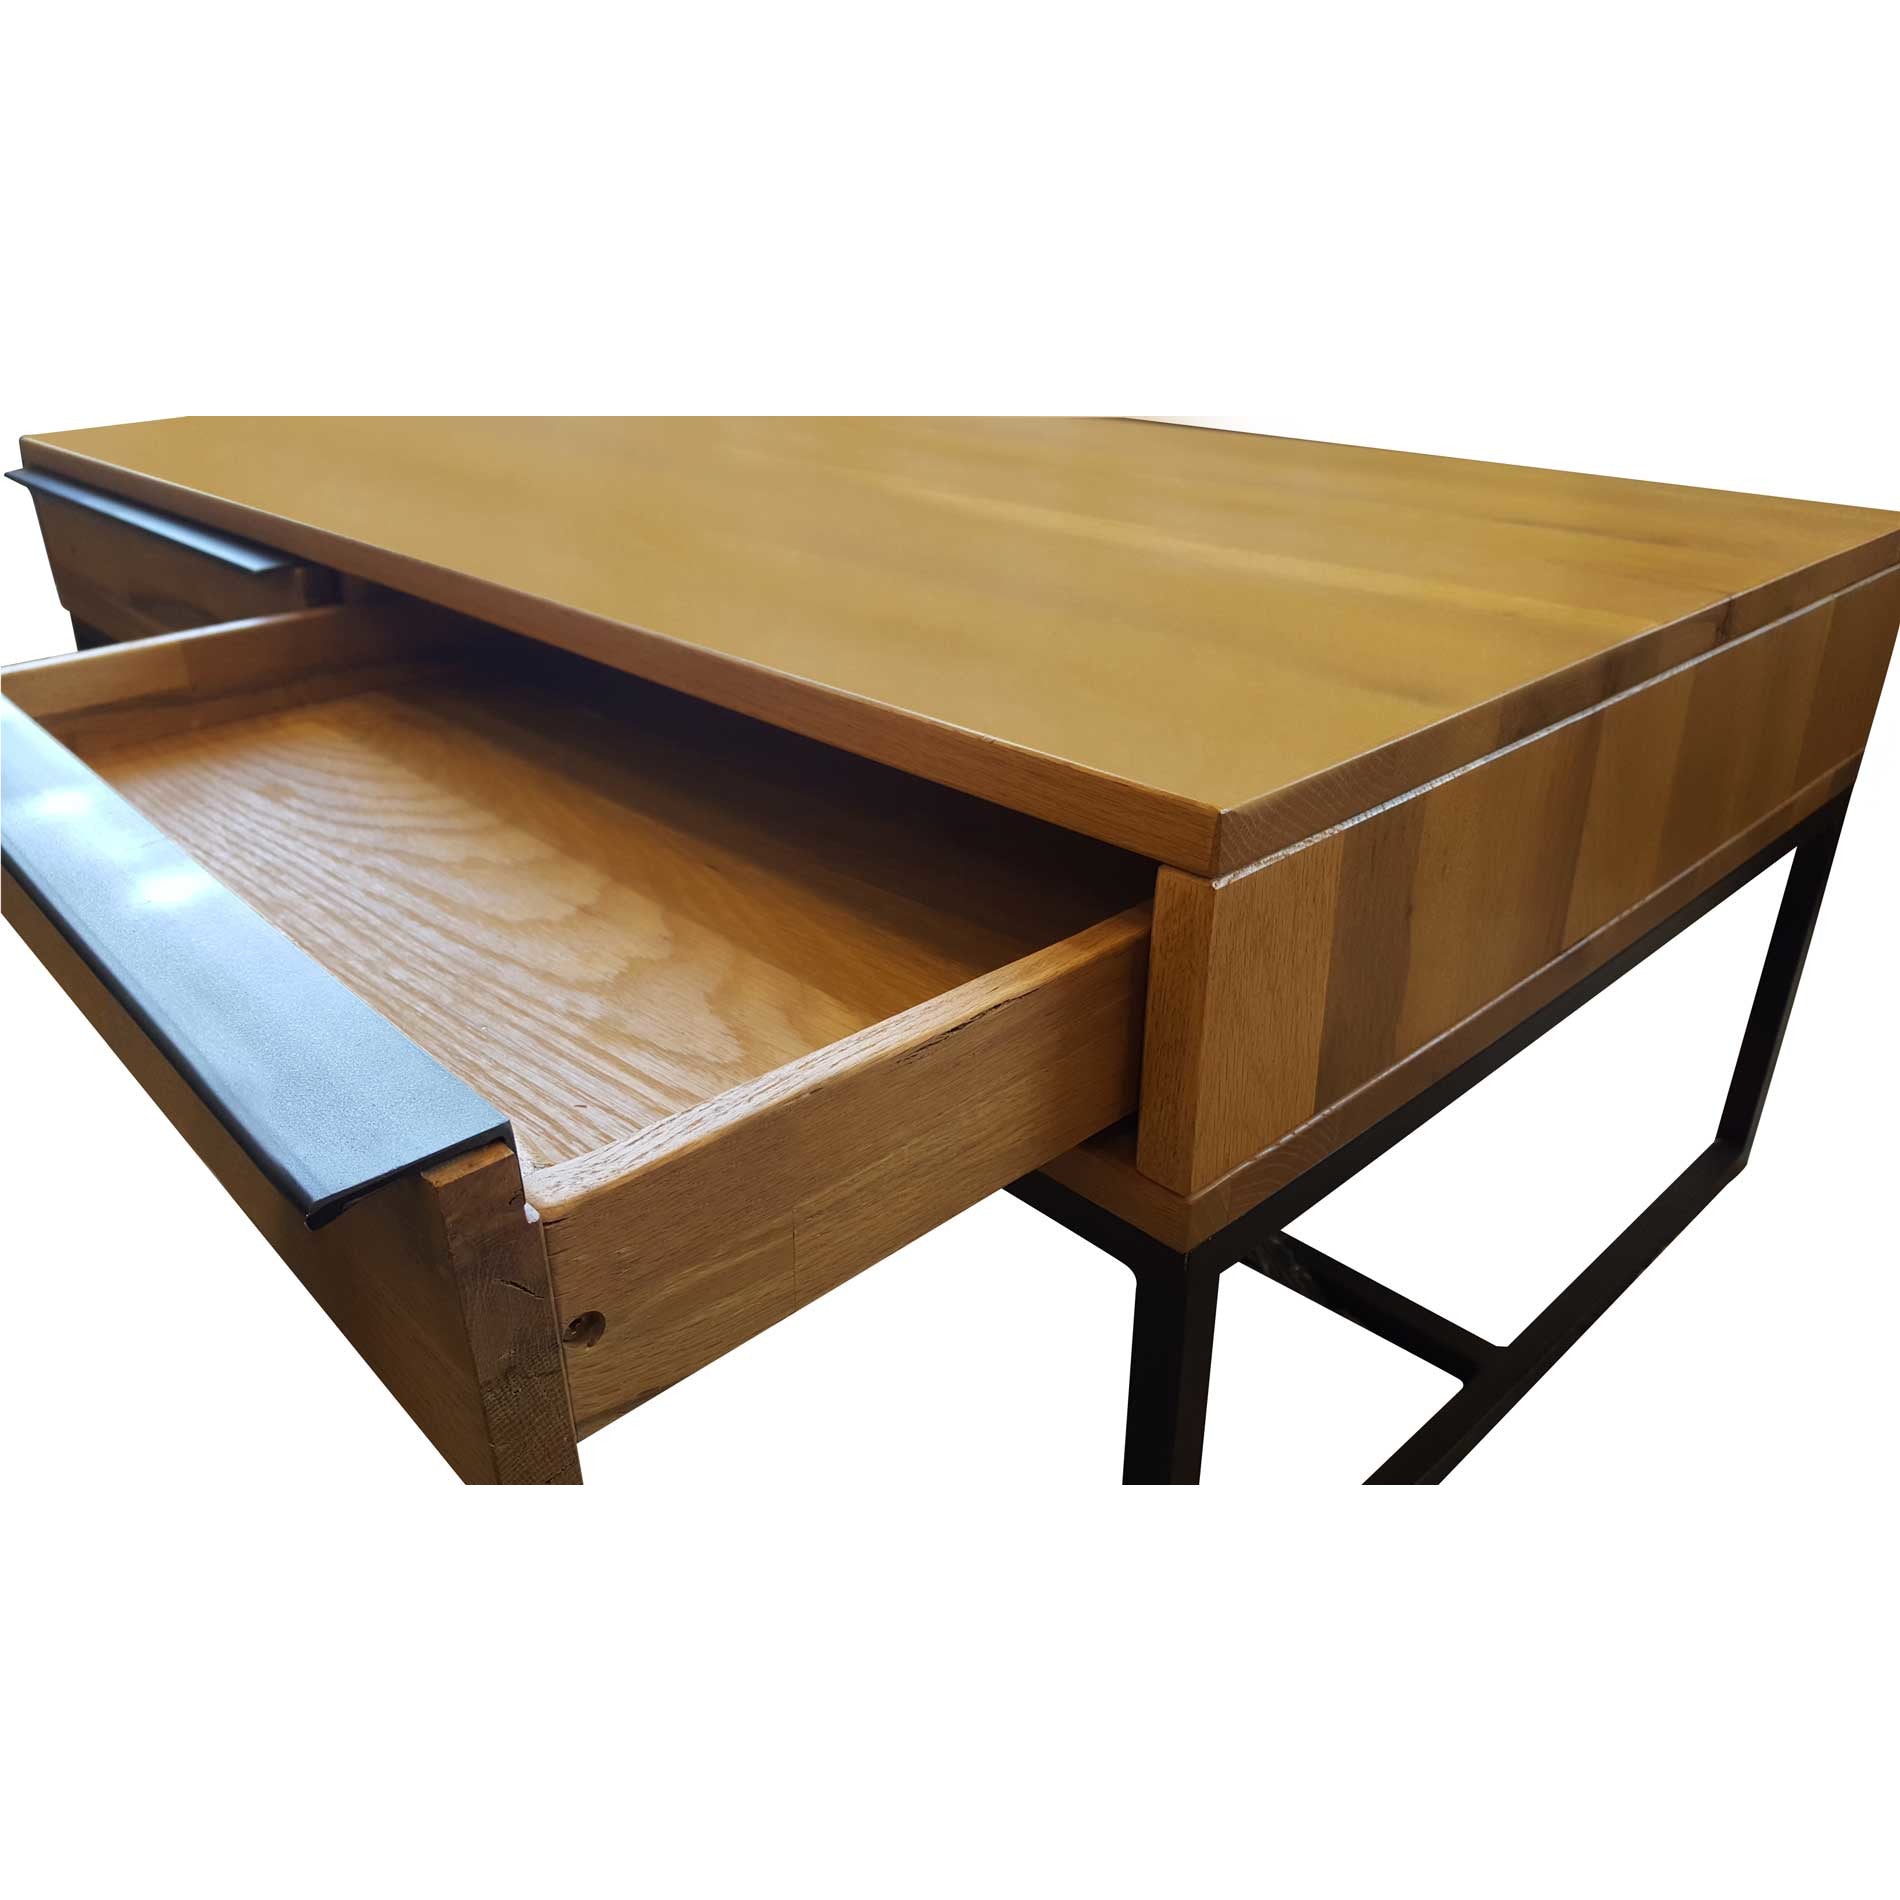 Shoreditch Coffee Table from Upstairs Downstairs Furniture in Lisburn, Monaghan and Enniskillen